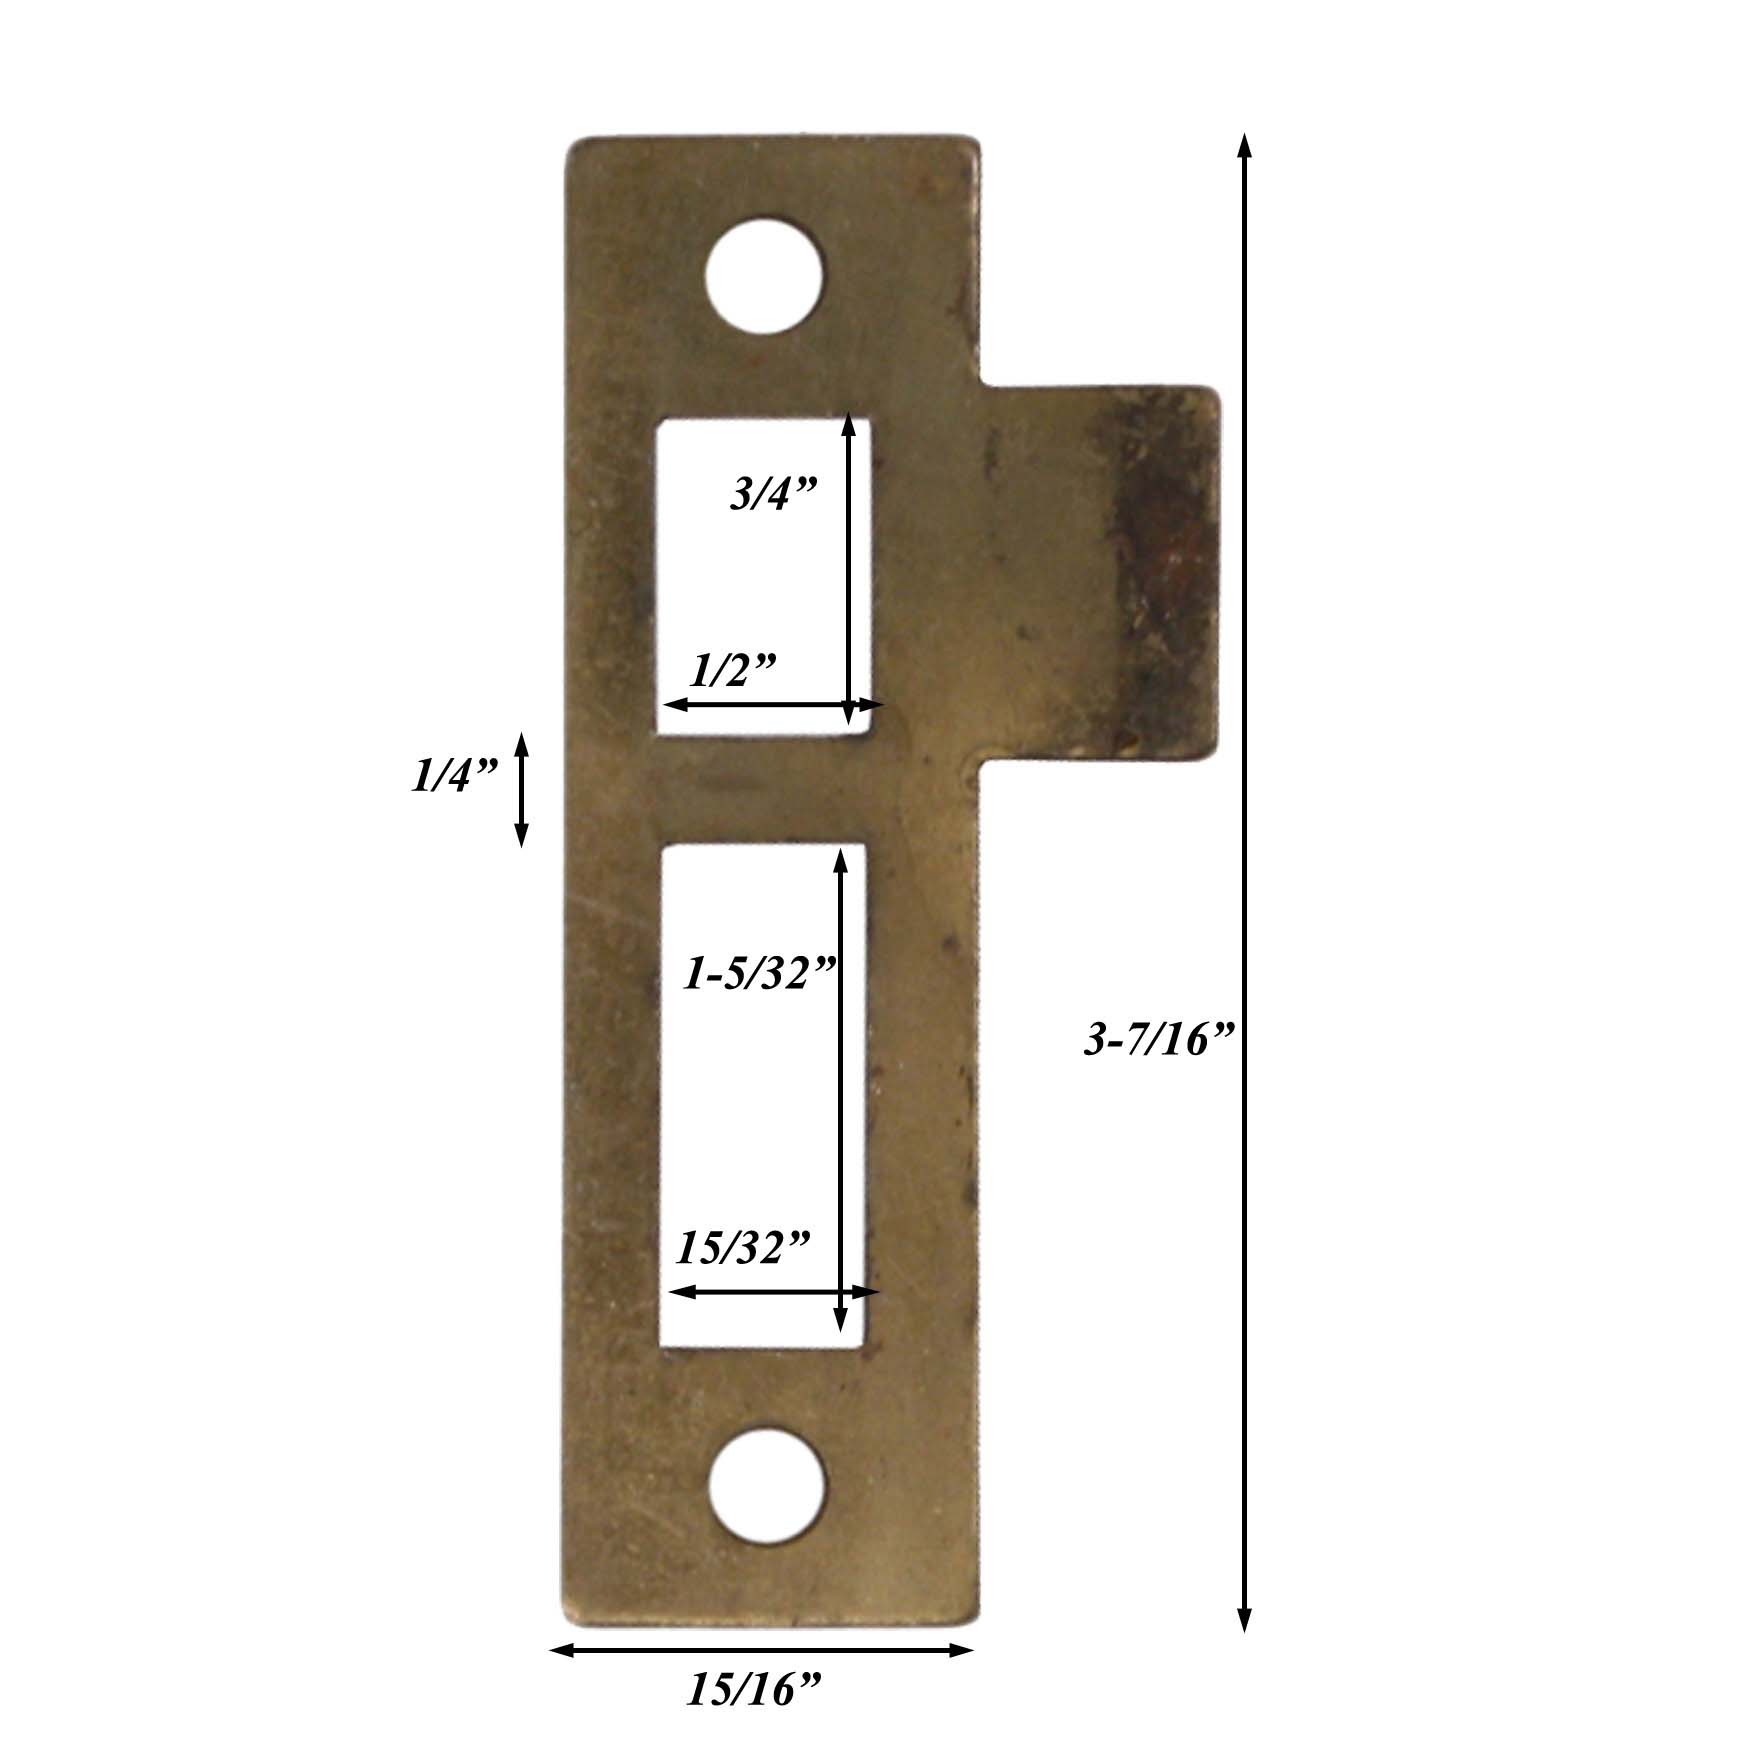 SOLD Antique Salvaged Strike Plates for Mortise Locks, 1/4” Spacing-41354